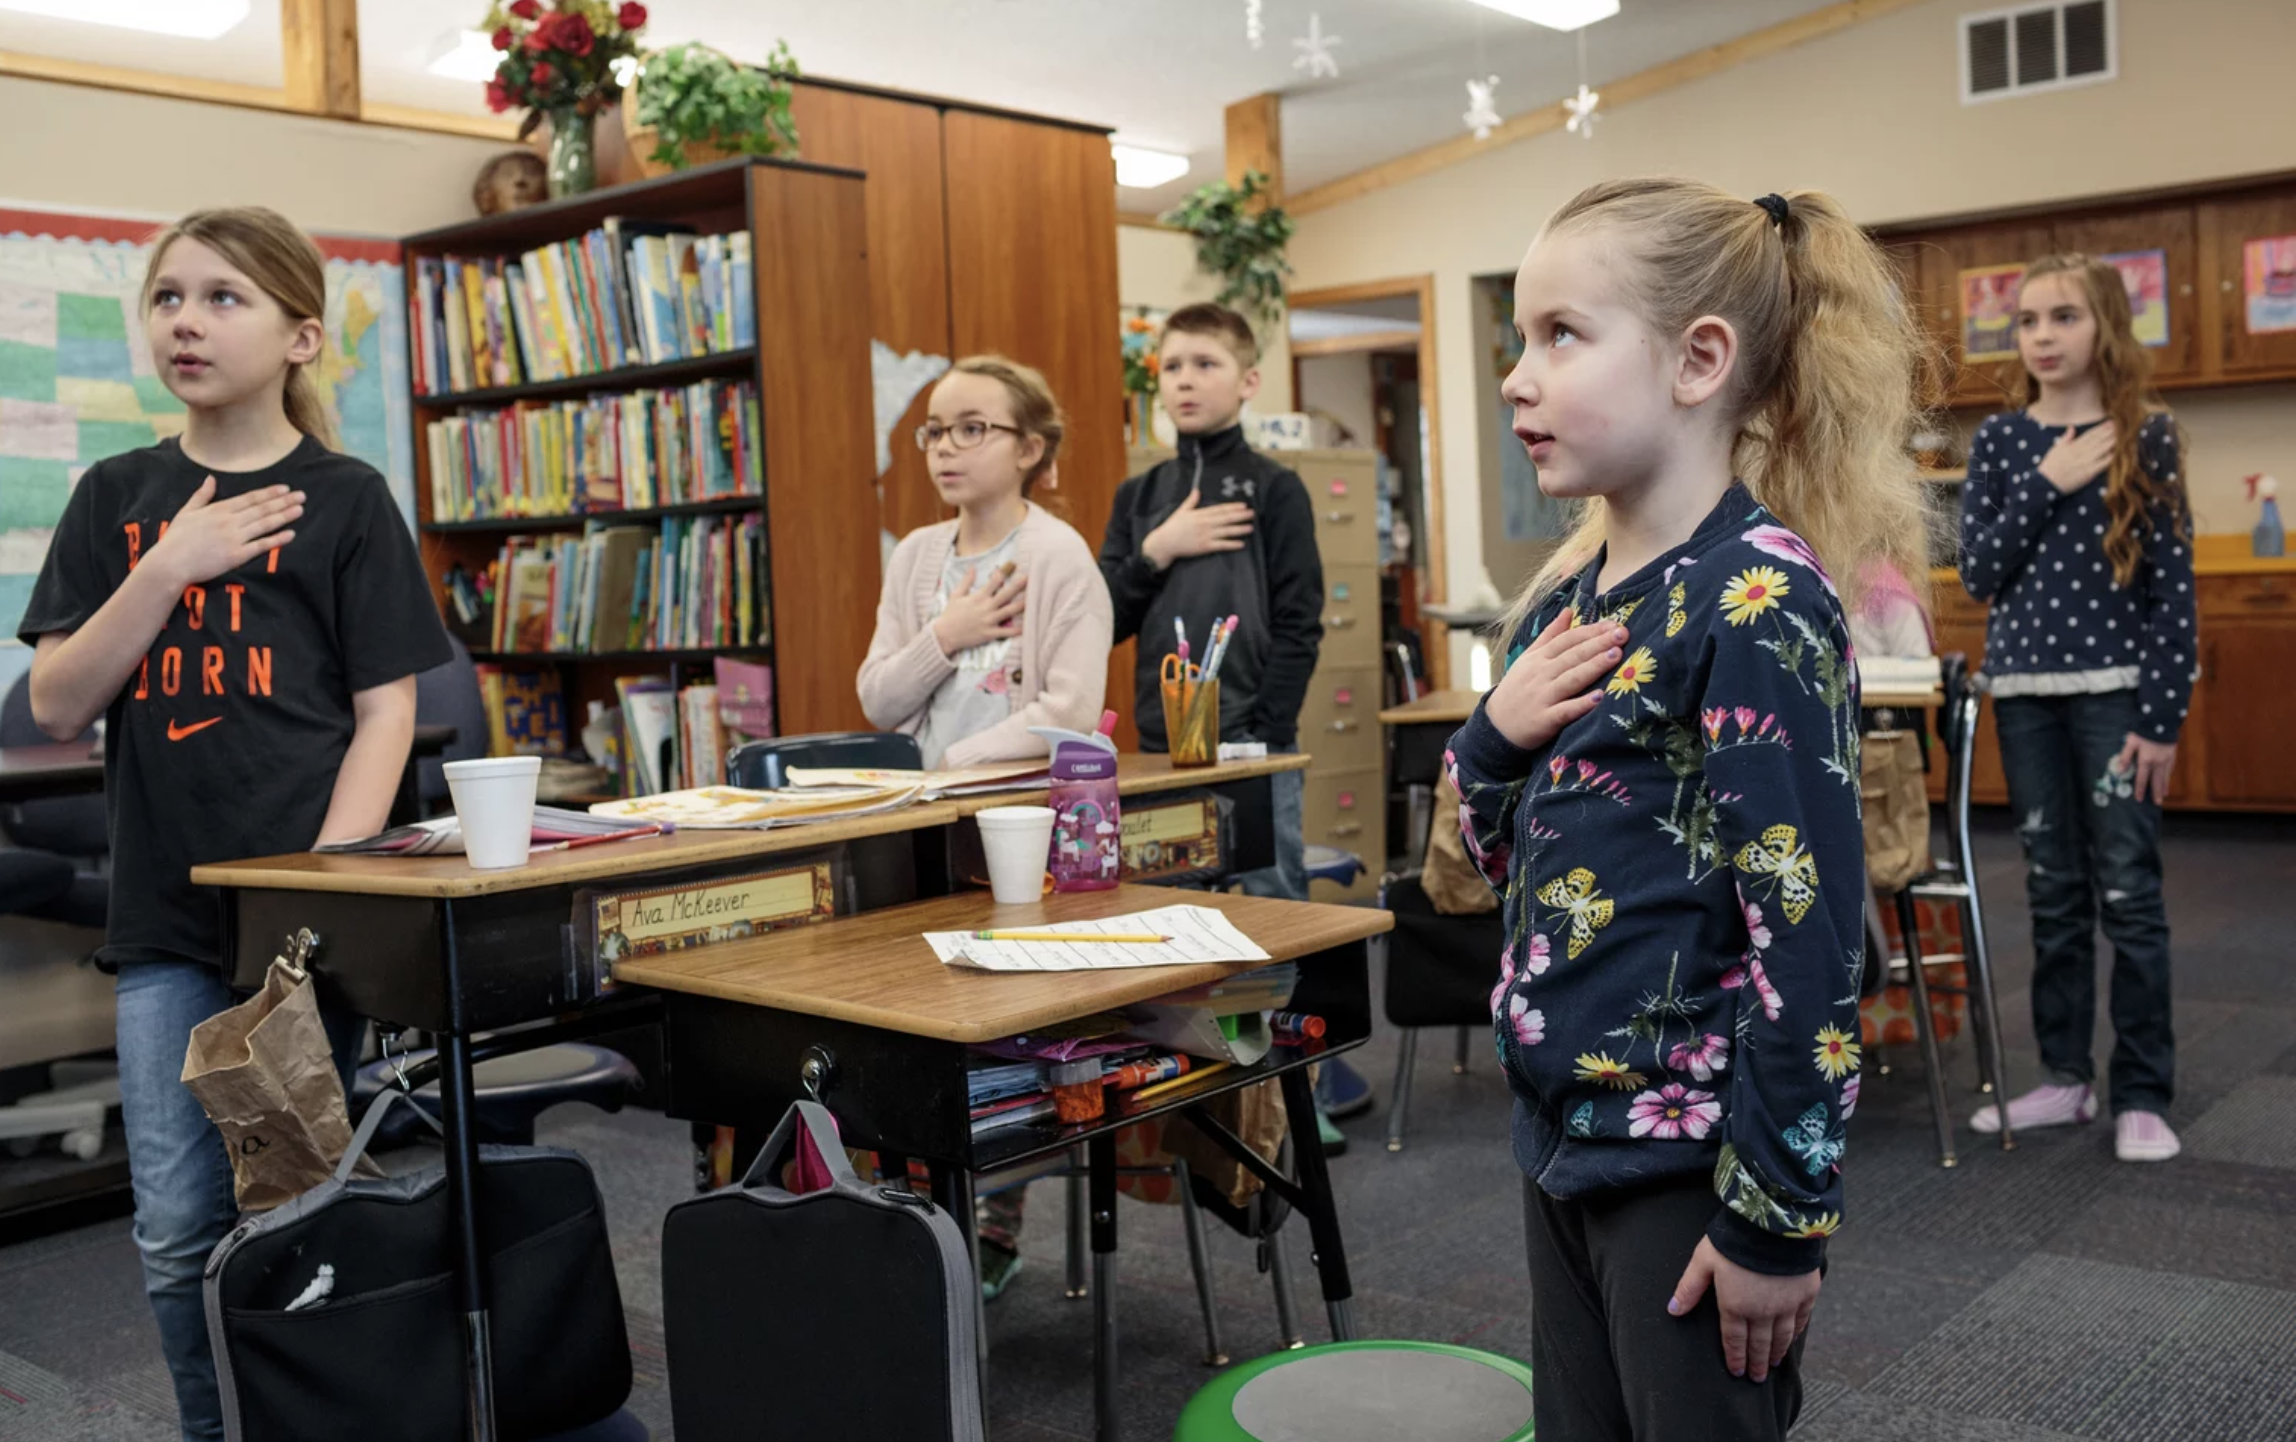 Students recite the Pledge of Allegiance at the Angle Inlet School